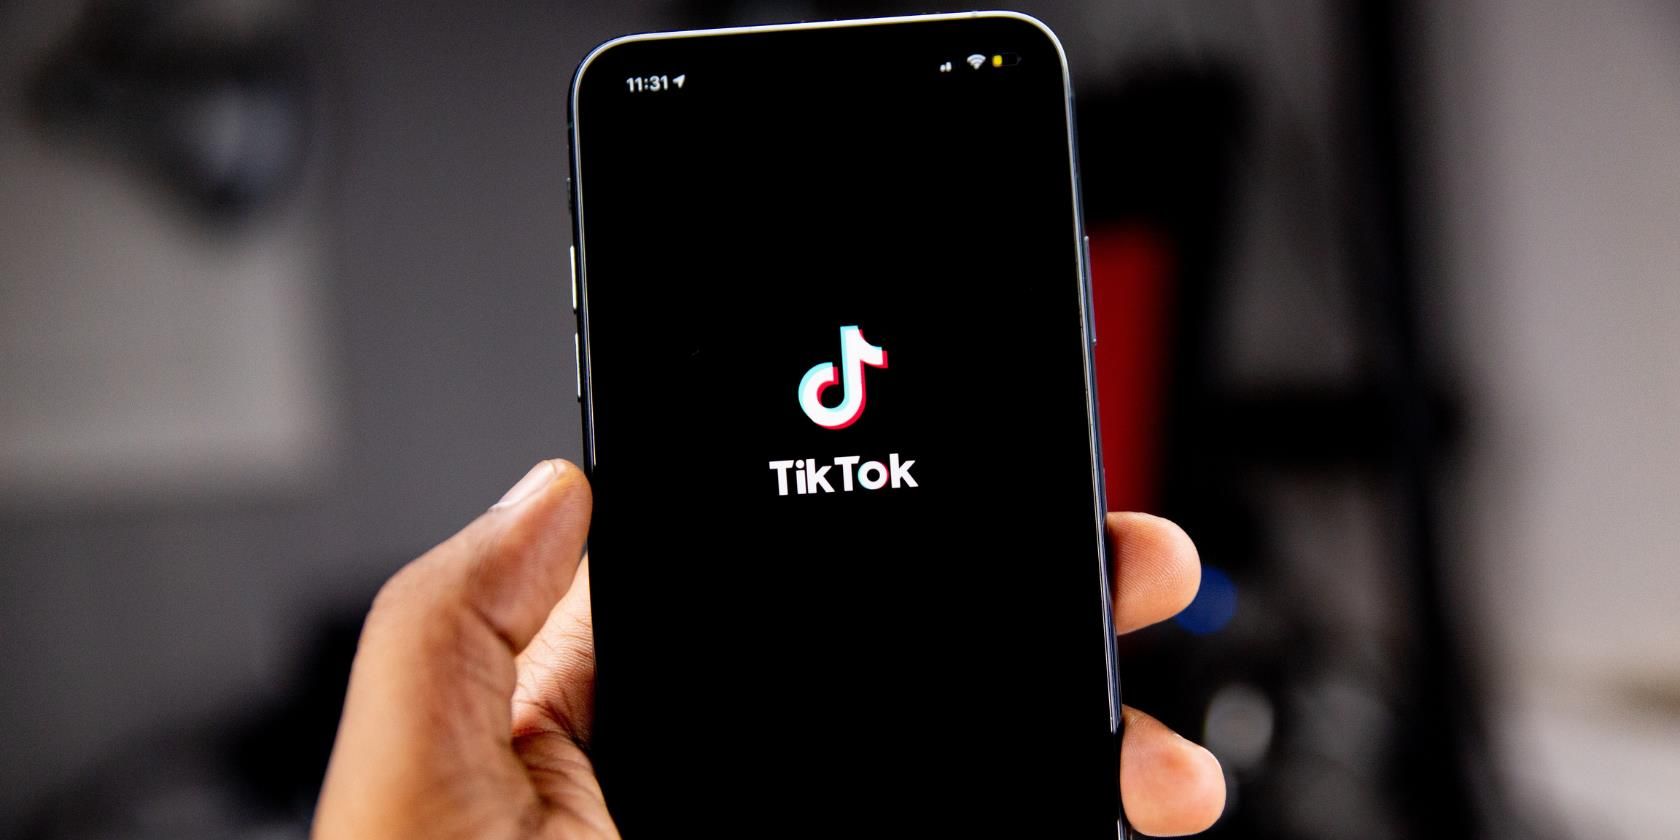 How to Obtain a Spot on TikTok’s “For You” Page (FYP)